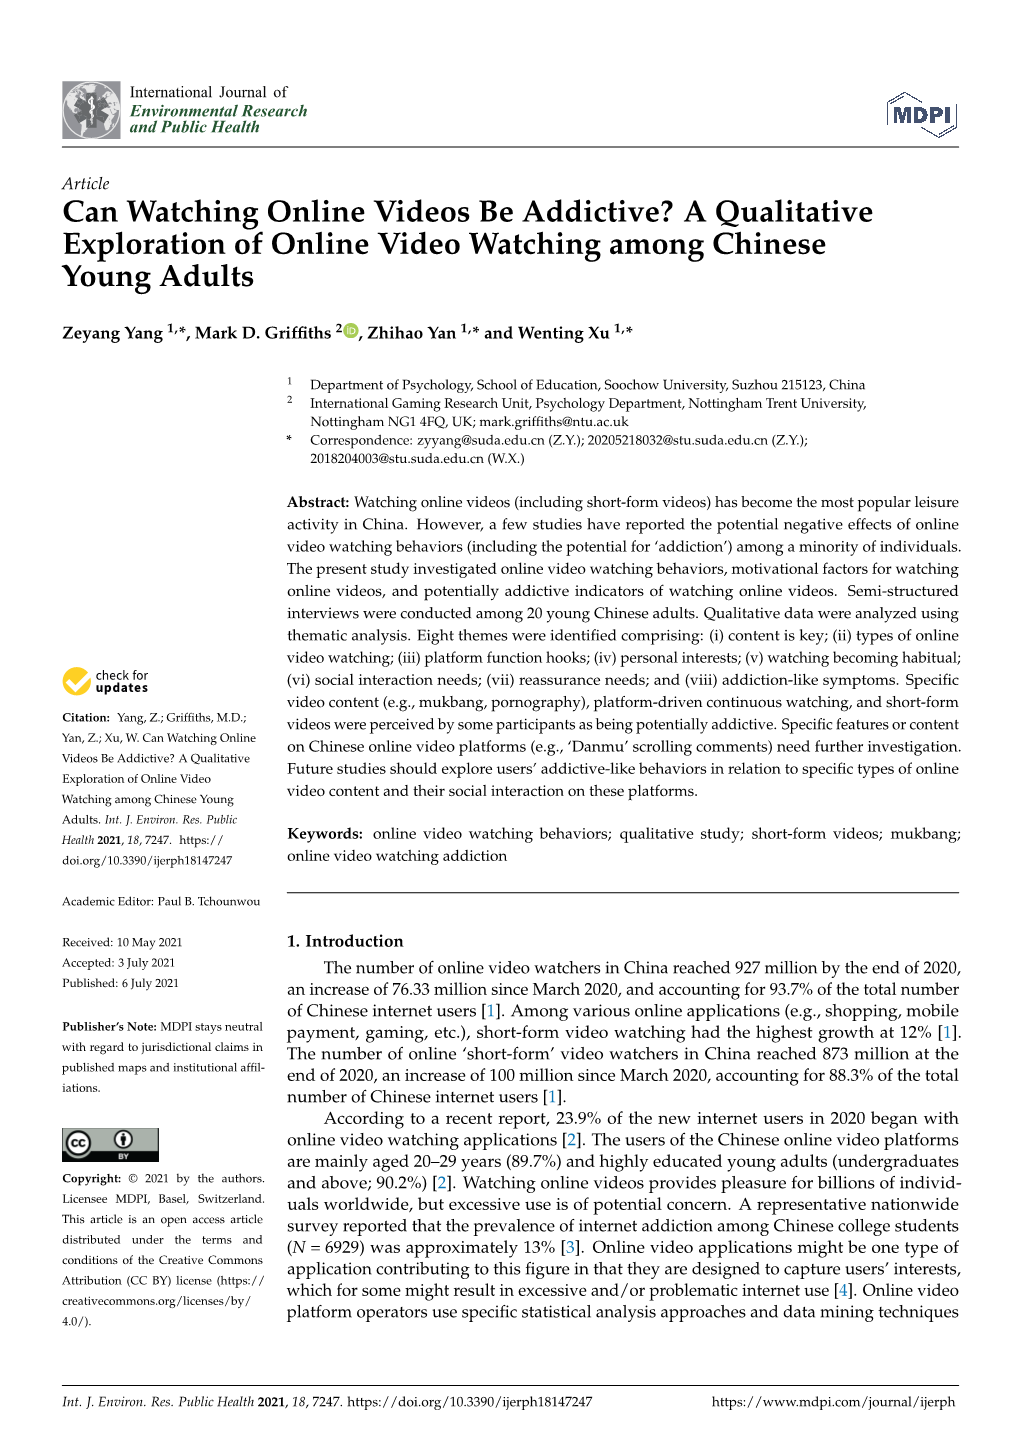 Can Watching Online Videos Be Addictive? a Qualitative Exploration of Online Video Watching Among Chinese Young Adults